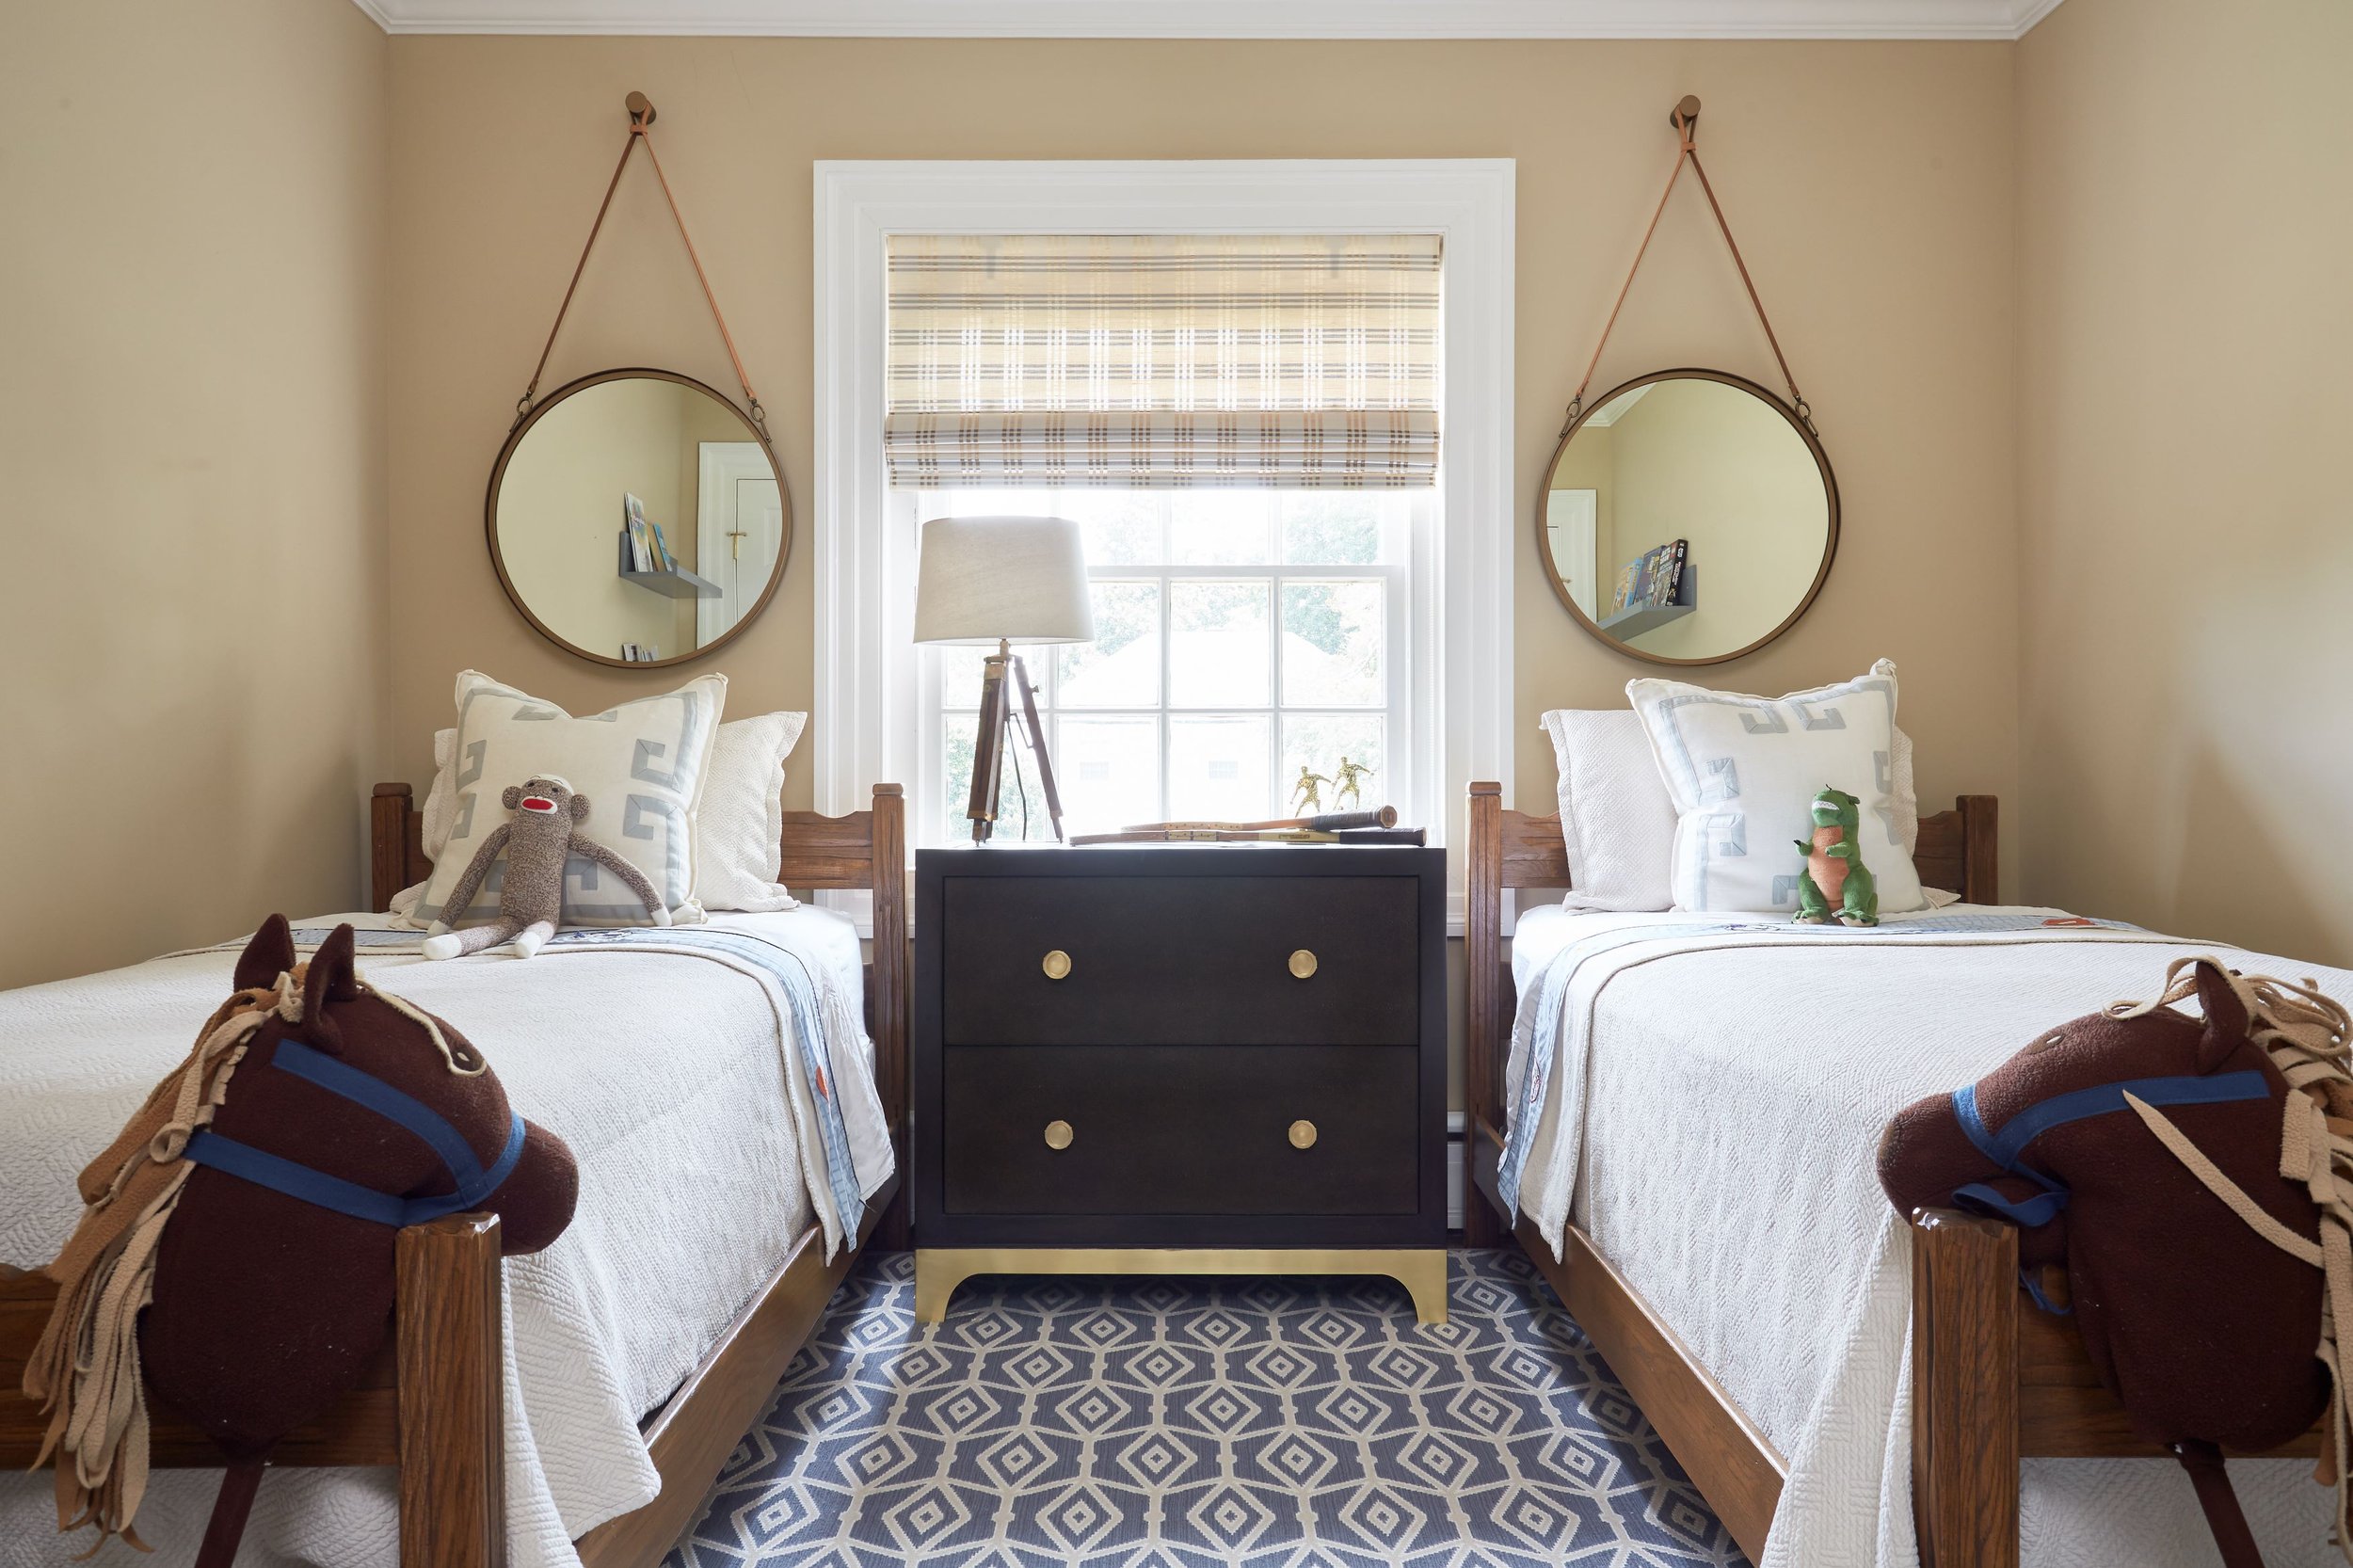 Washington Post, 7 Paint Colors That Will Give Your Bedroom a Soothing Vibe